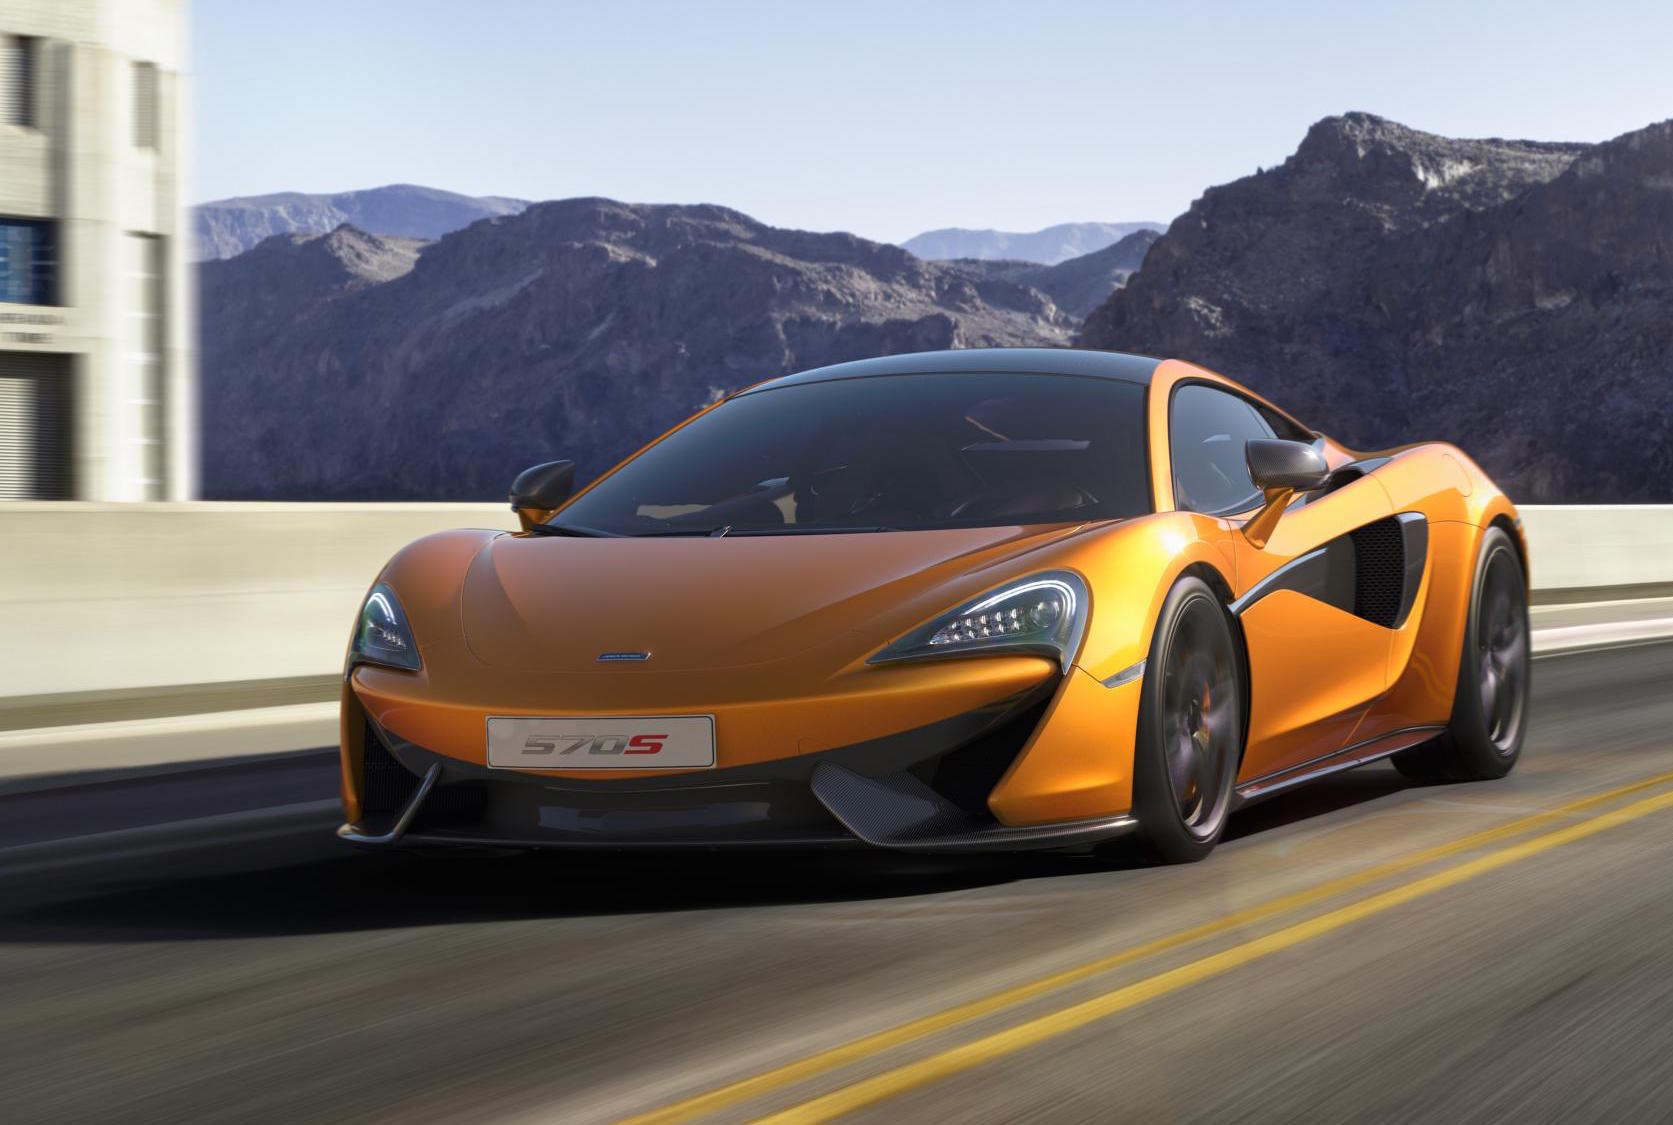 McLaren adding two new Sports Series models, due 2016 & 2017